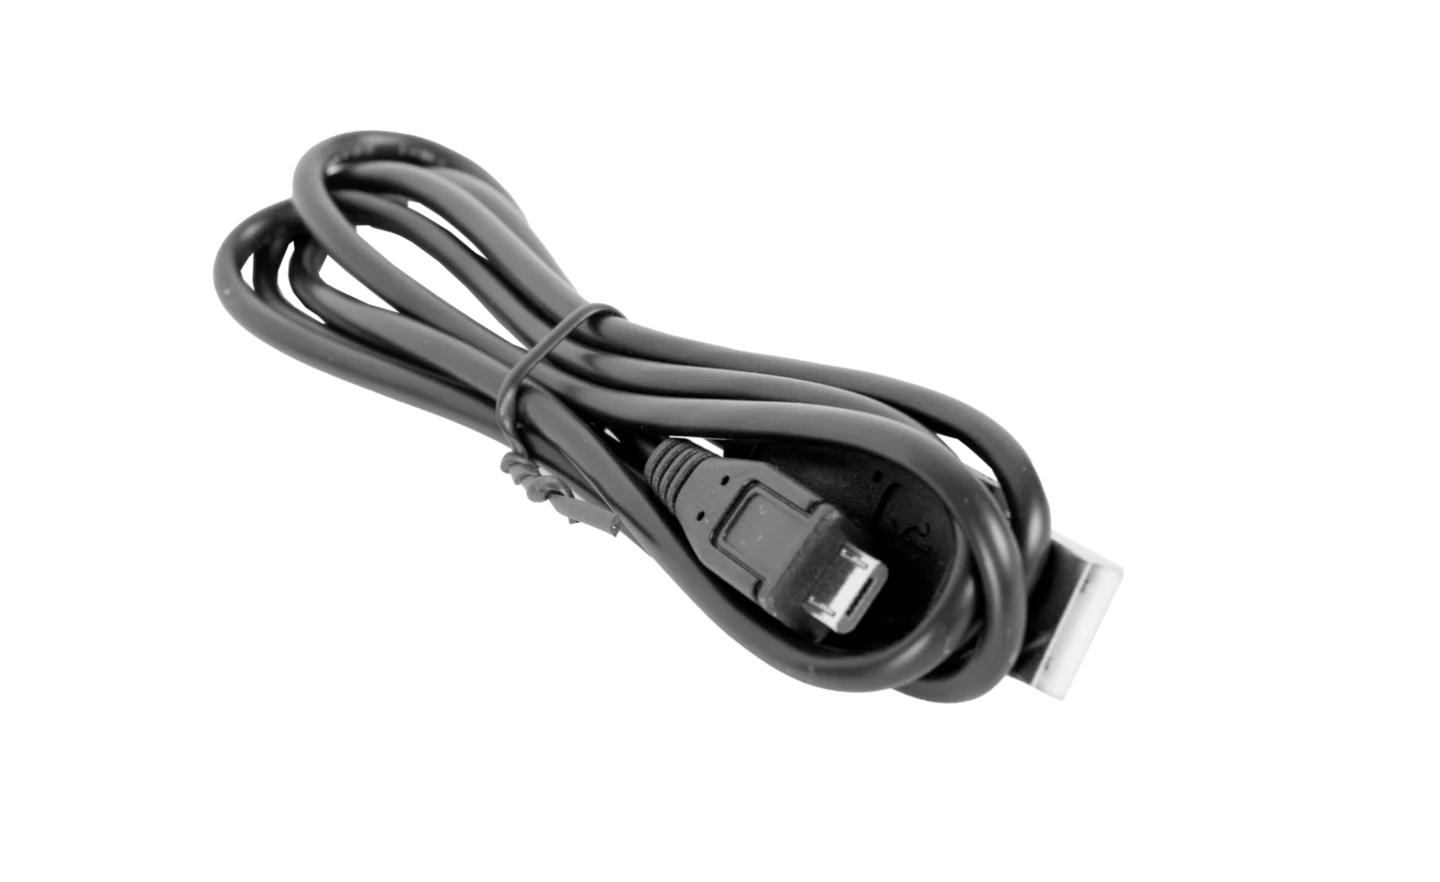 MicroUSB cable